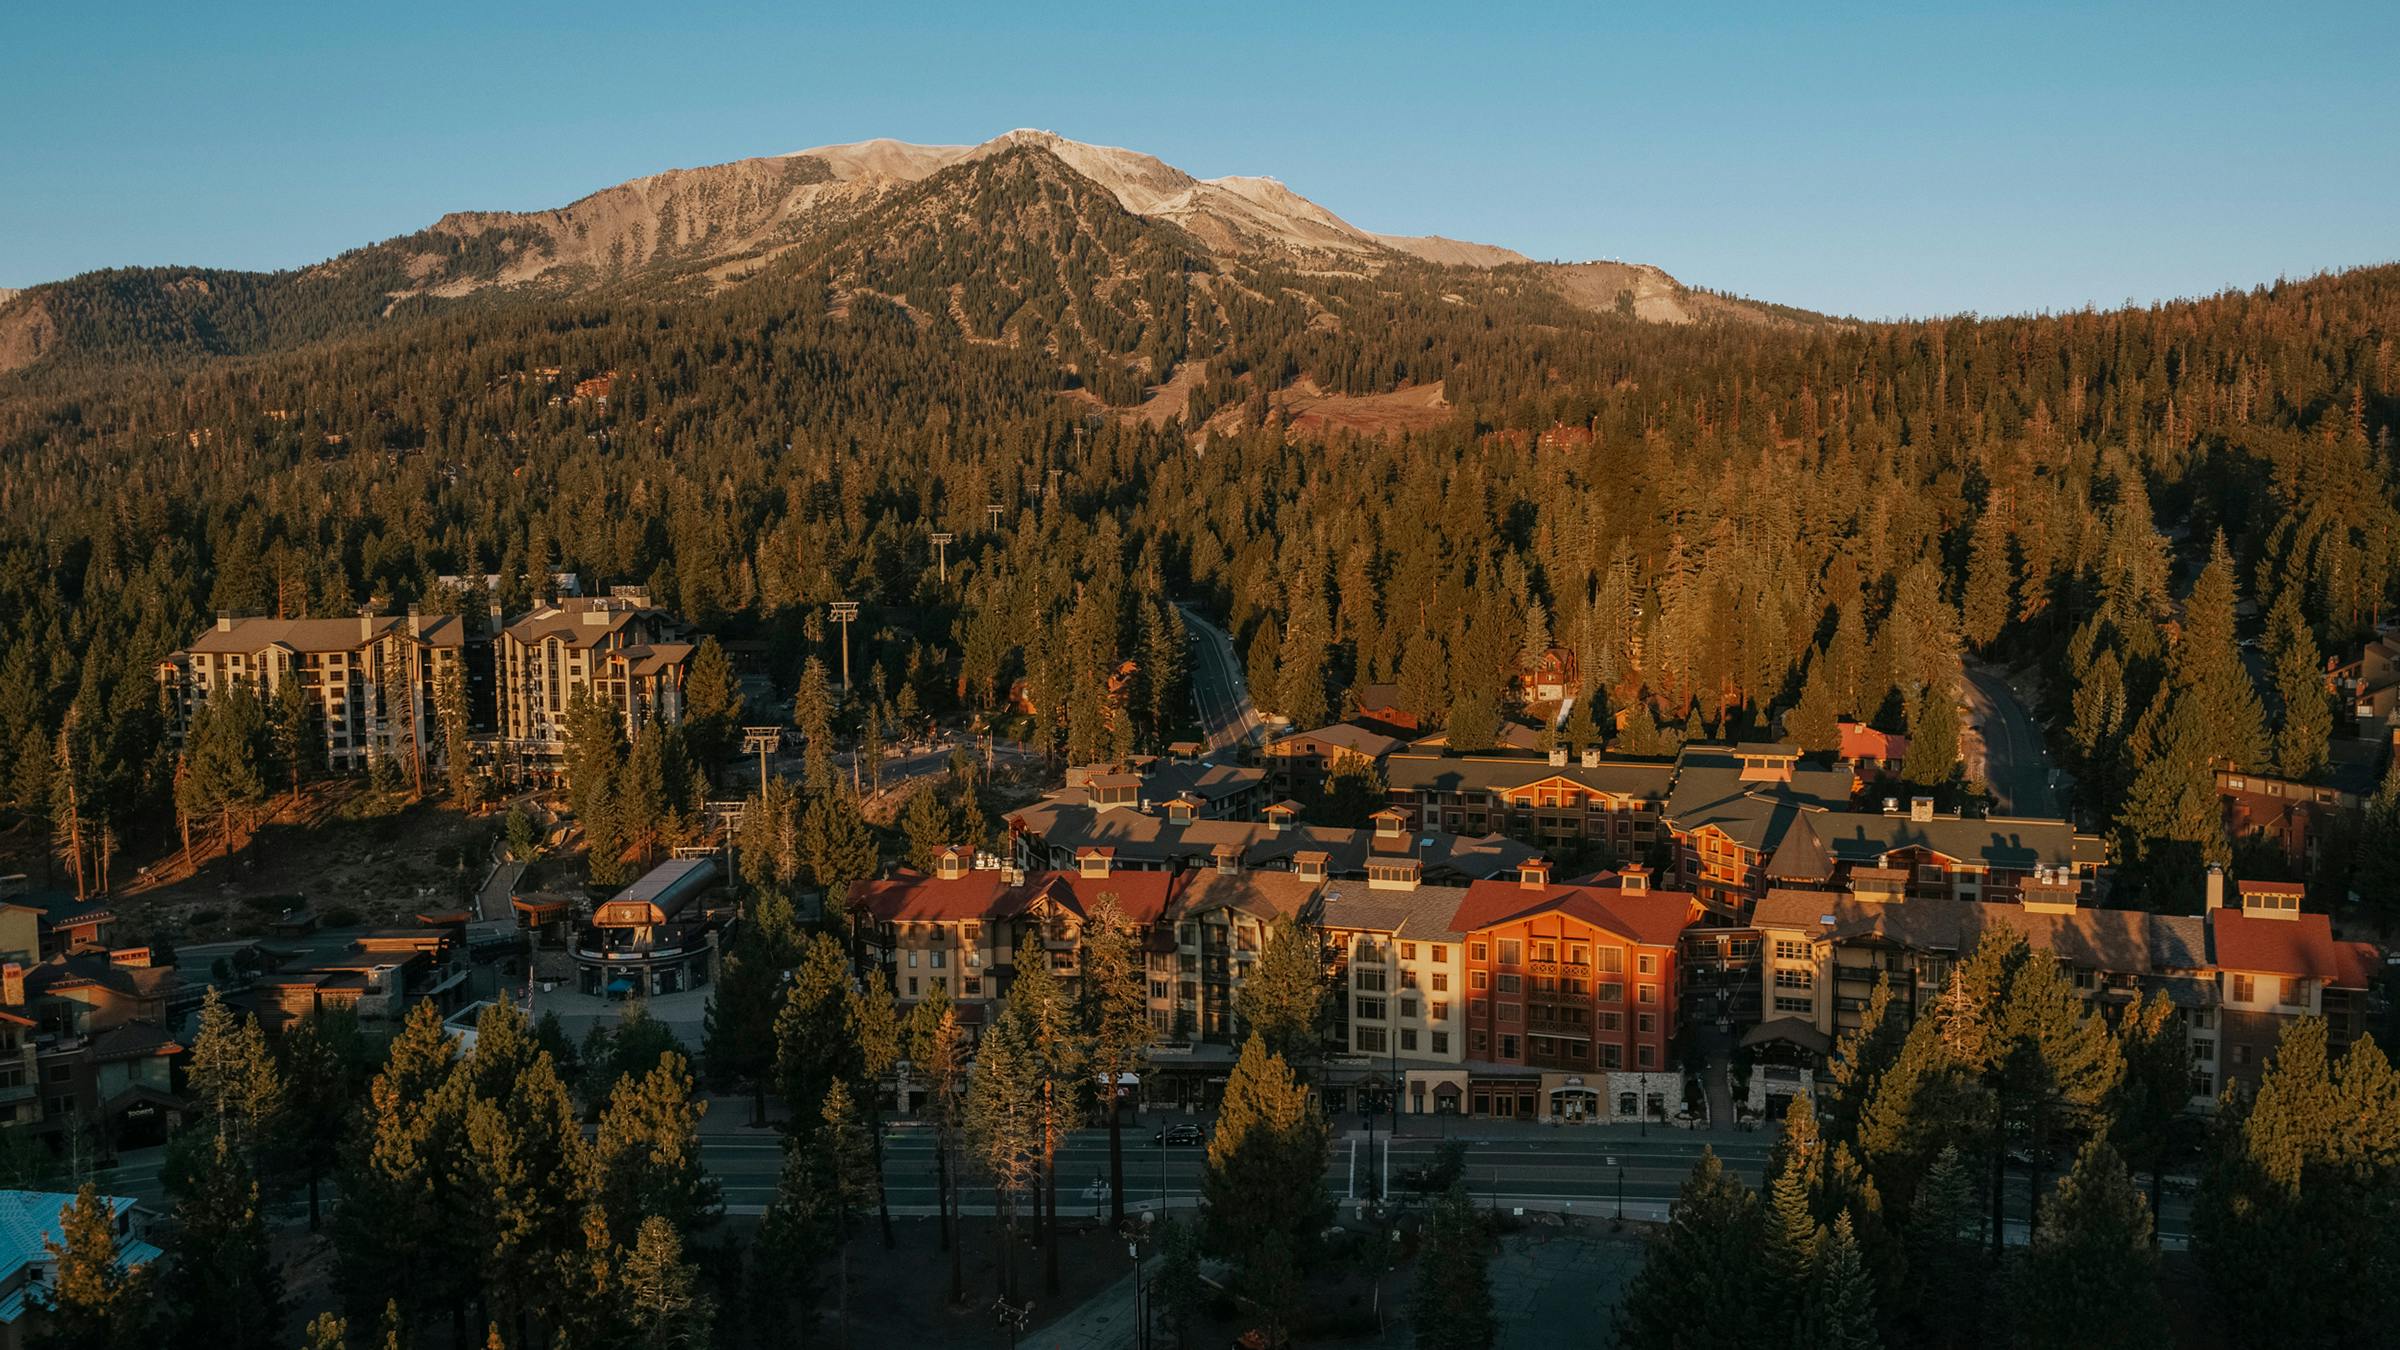 Drone shot of The Village at Mammoth during summer with Mammoth Mountain in the background